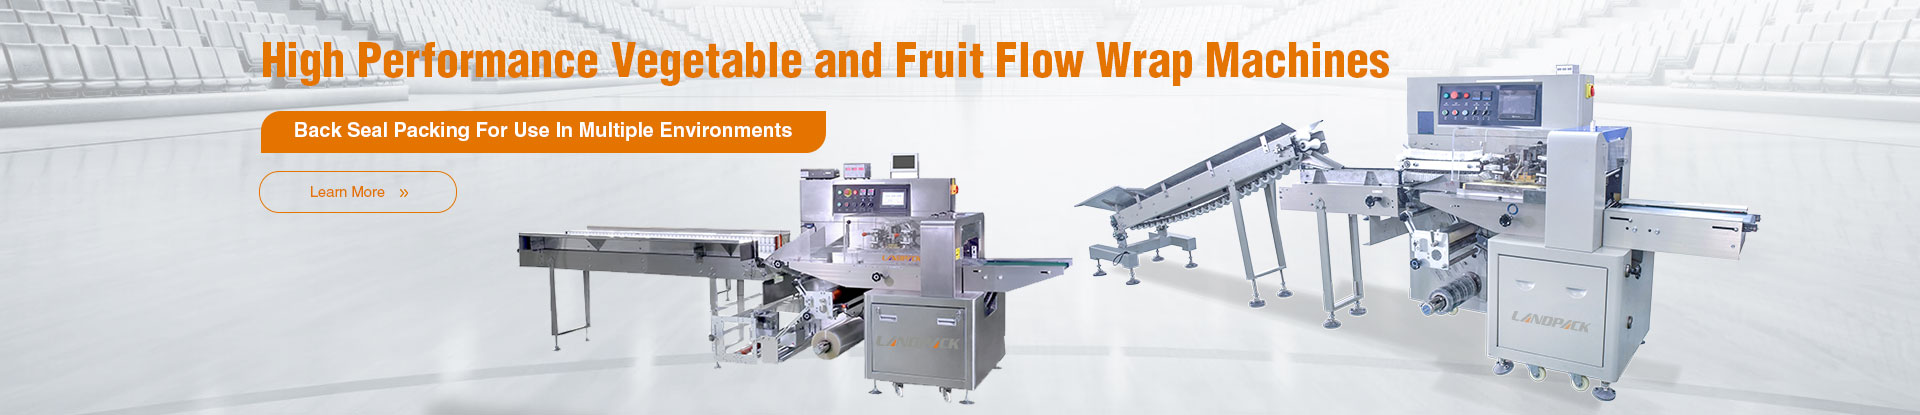 High Performance Vegetable and Fruit Flow Wrap Machines